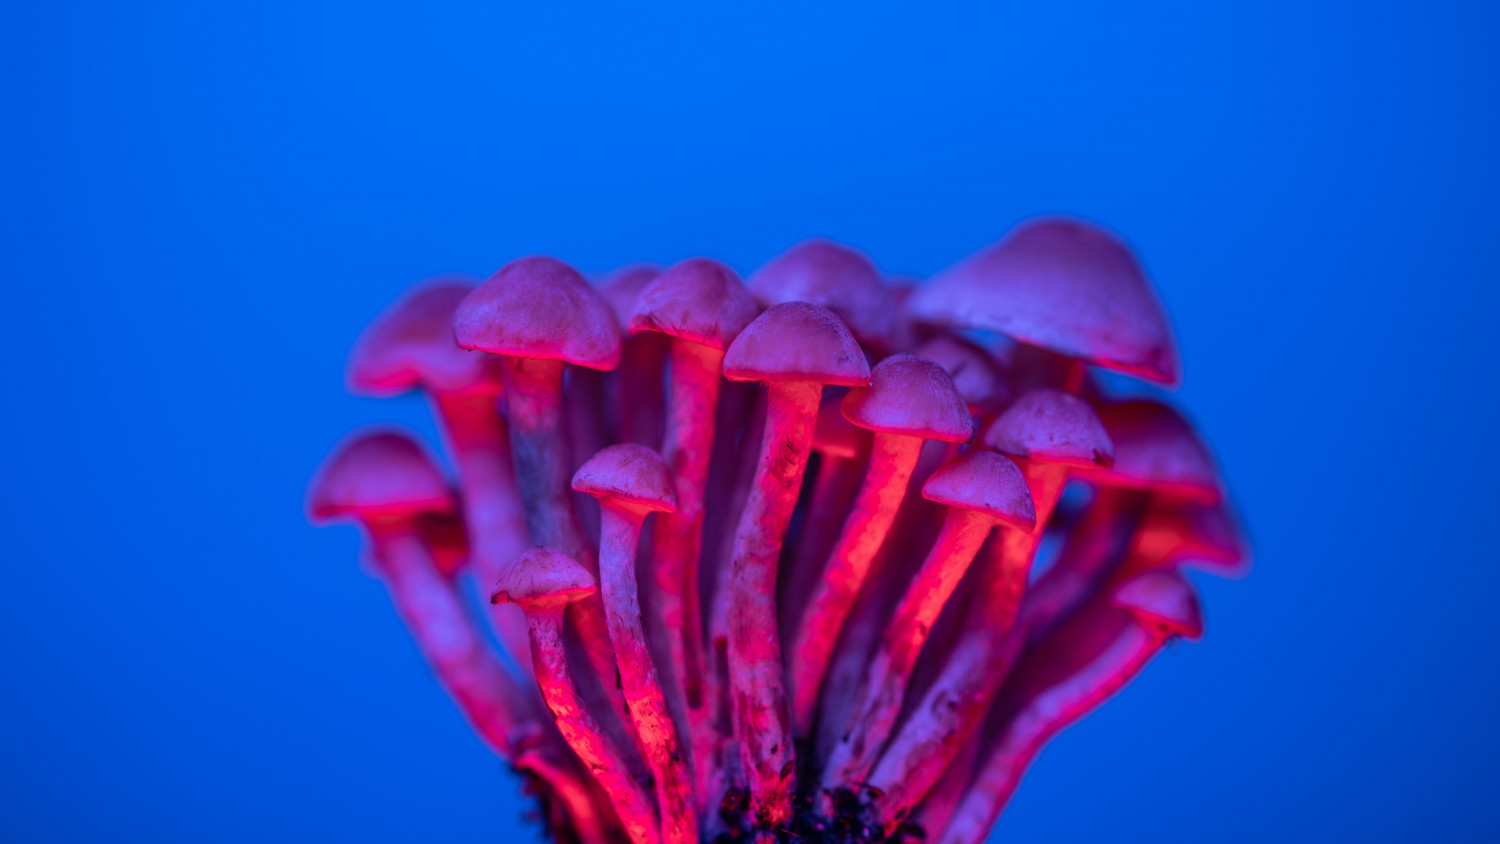 The Do's and Don'ts of Your First Mushroom Trip